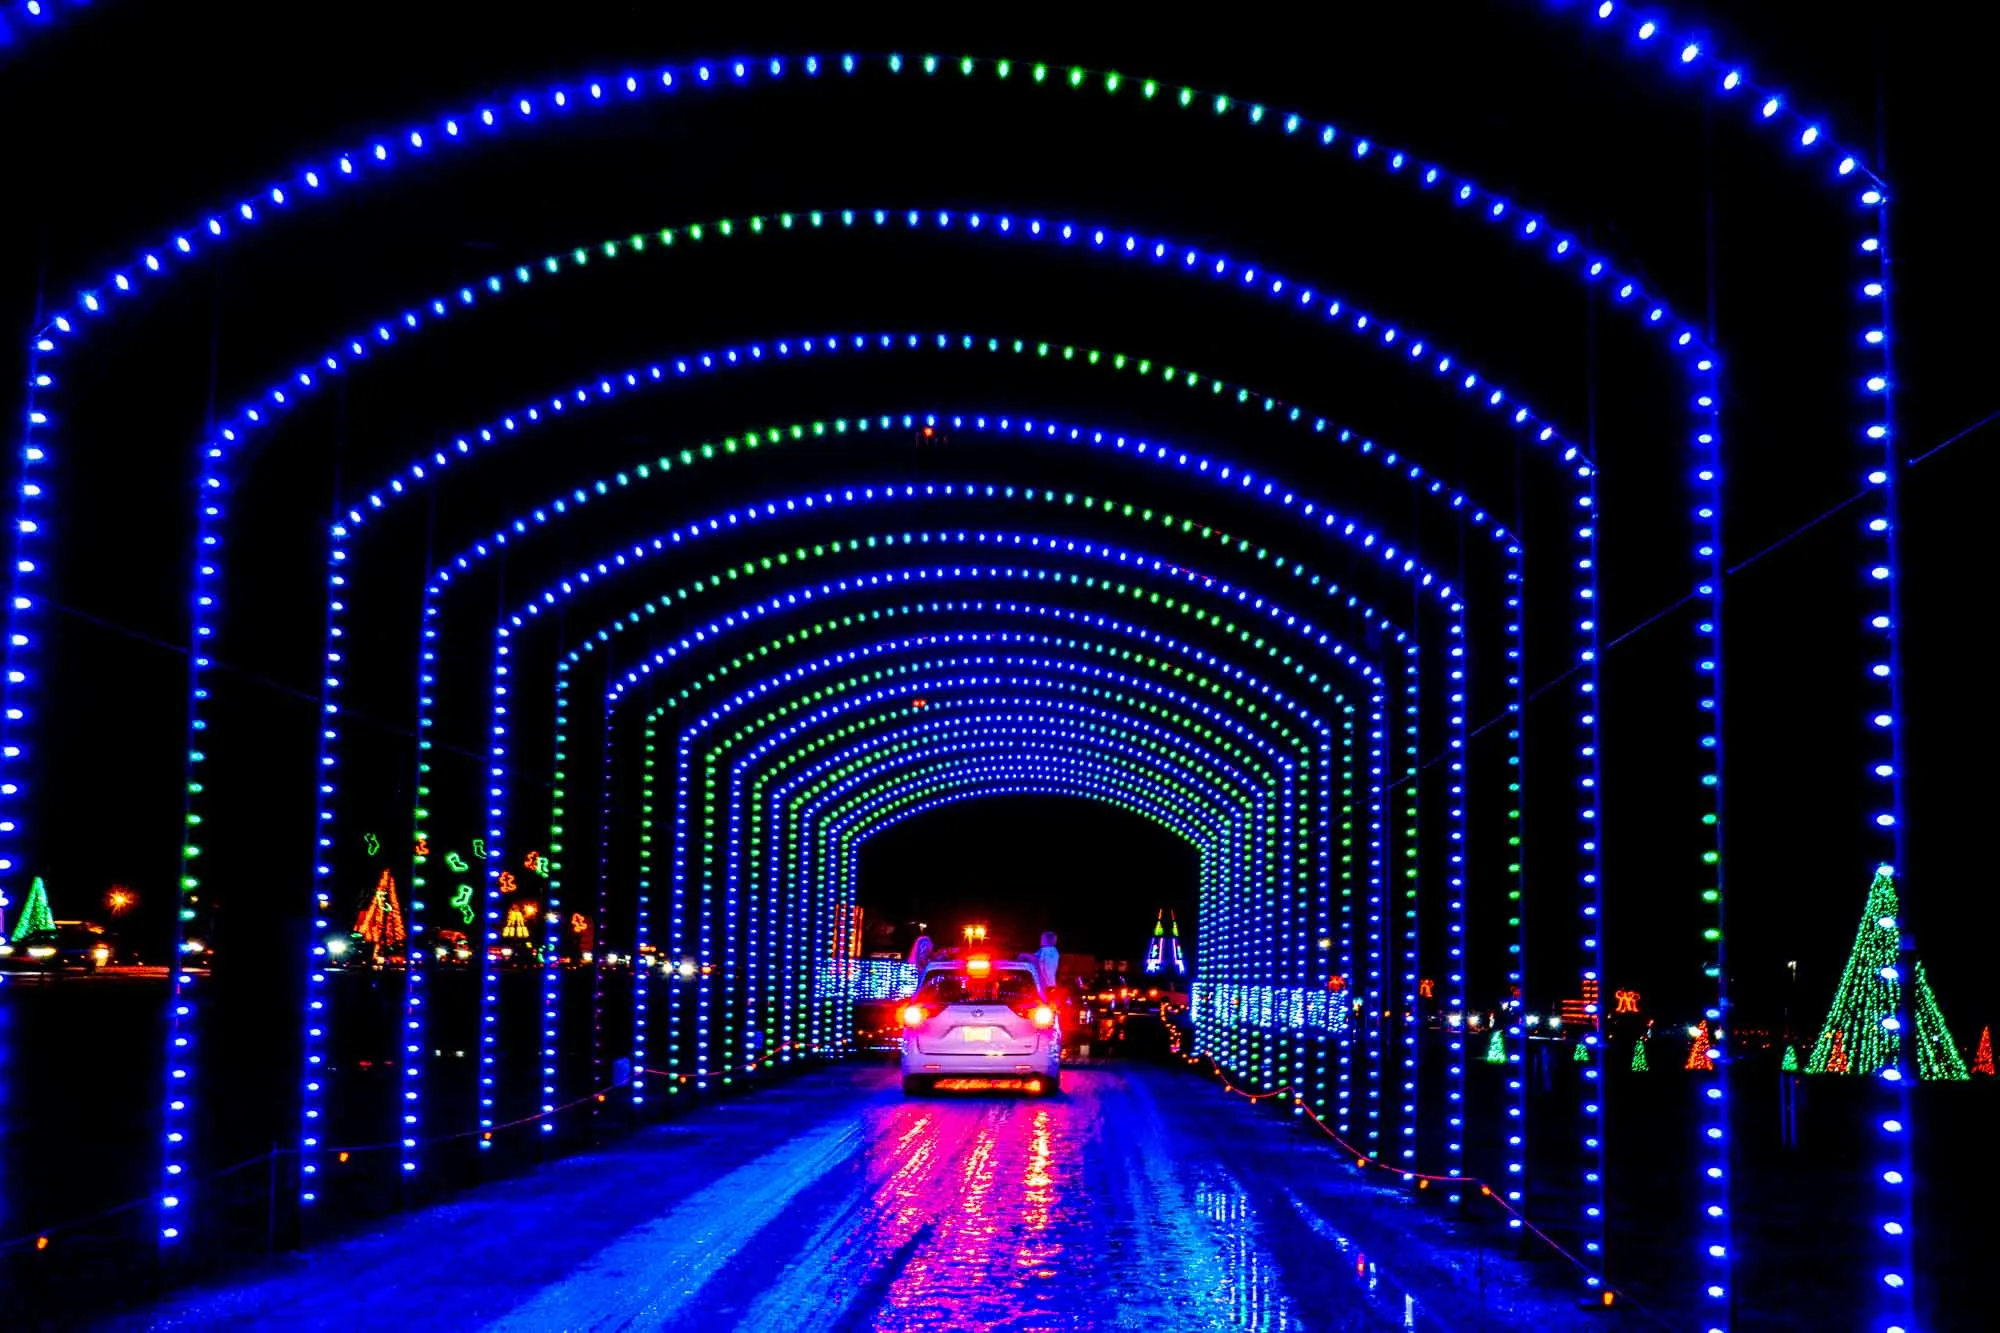 Car driving through a tunnel of Christmas lights.